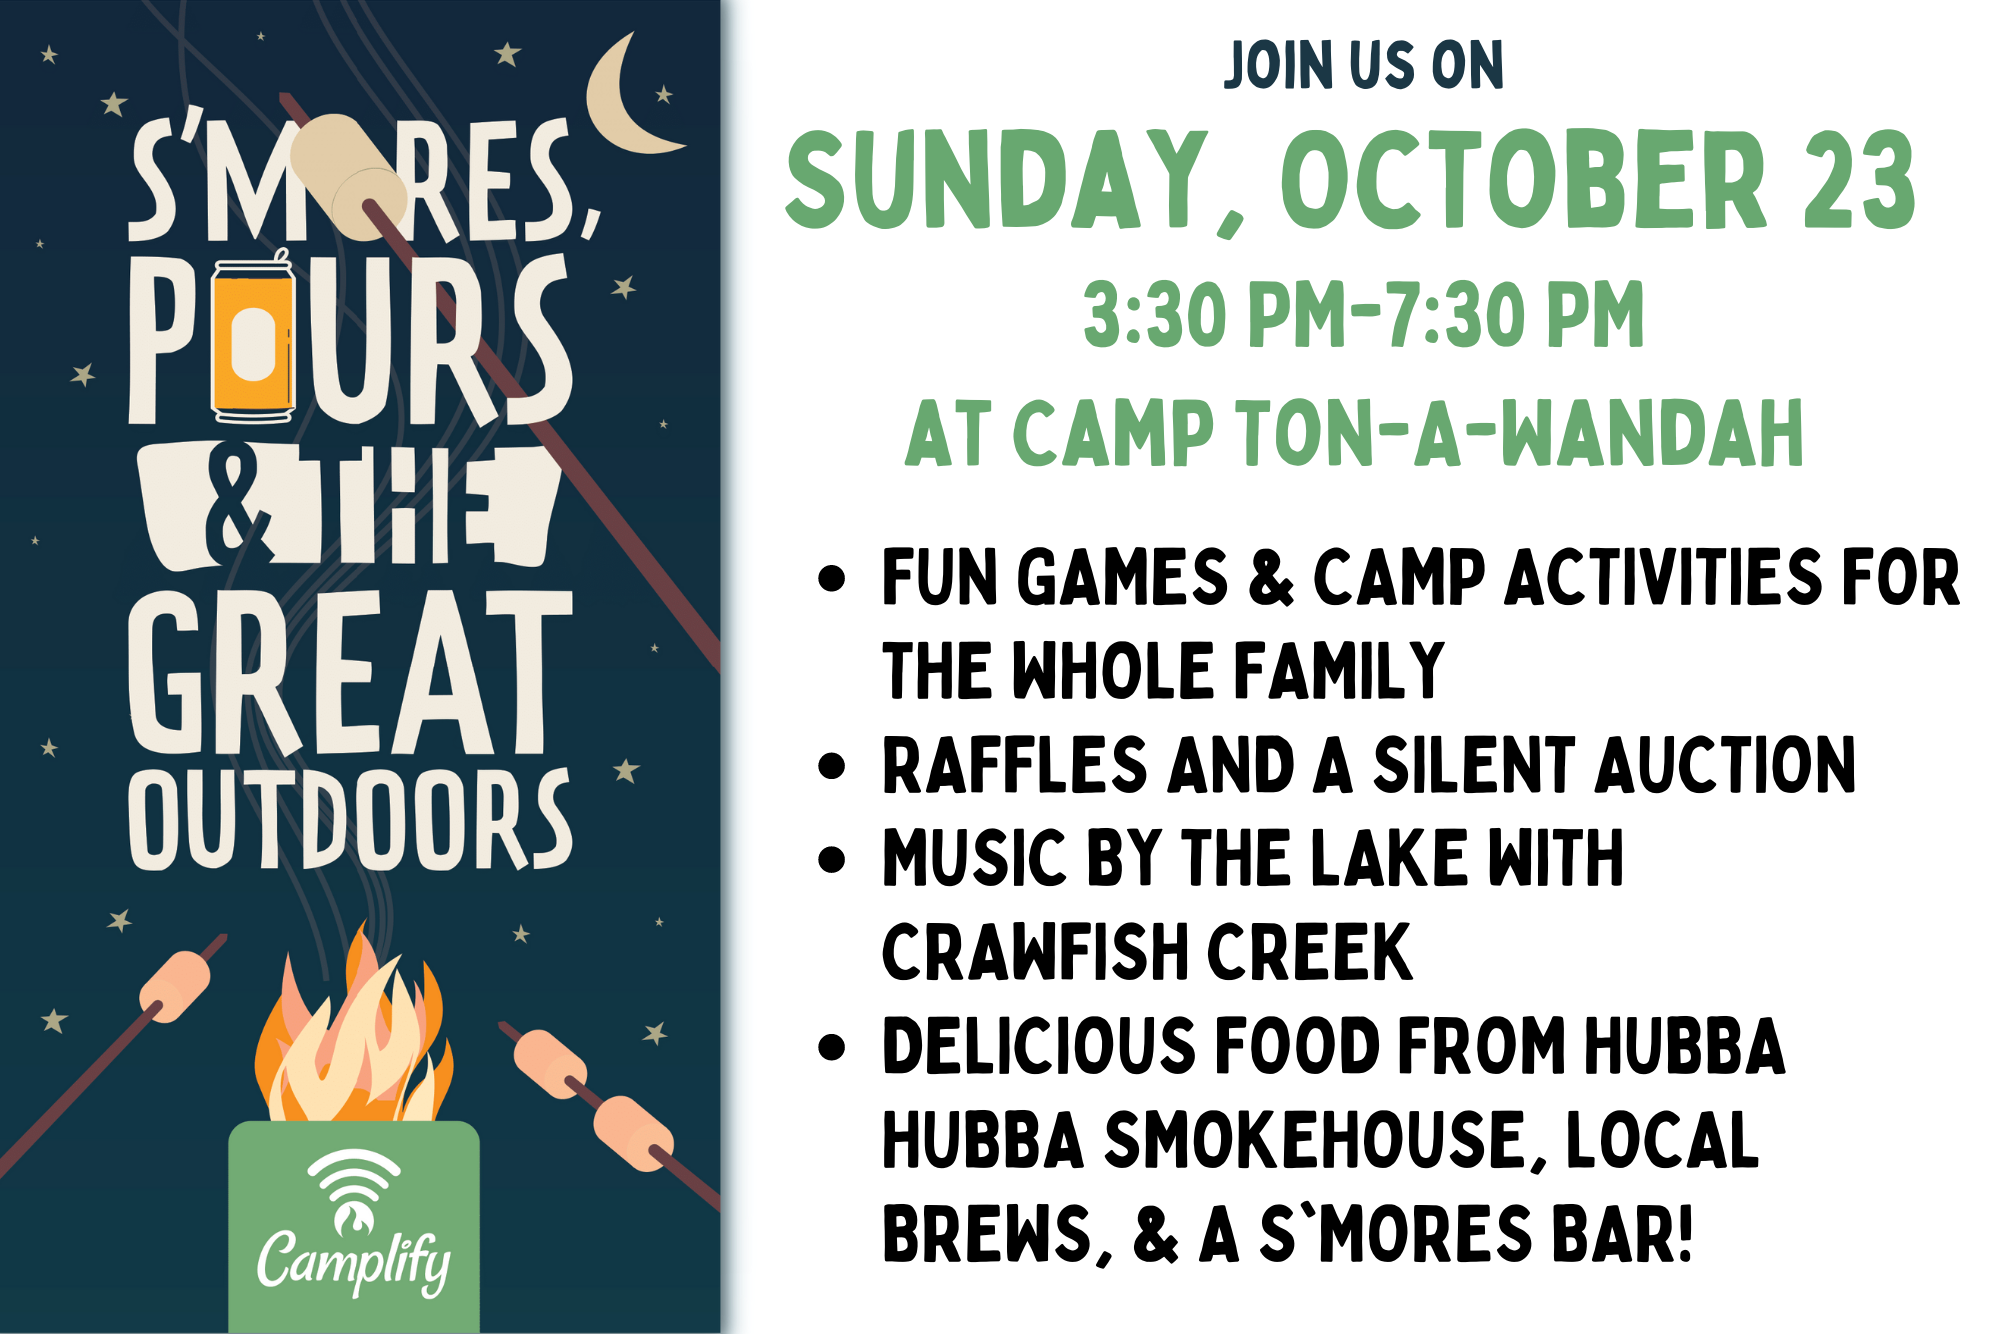 S'mores, Pours, and the Great Outdoors 2022 on October 23